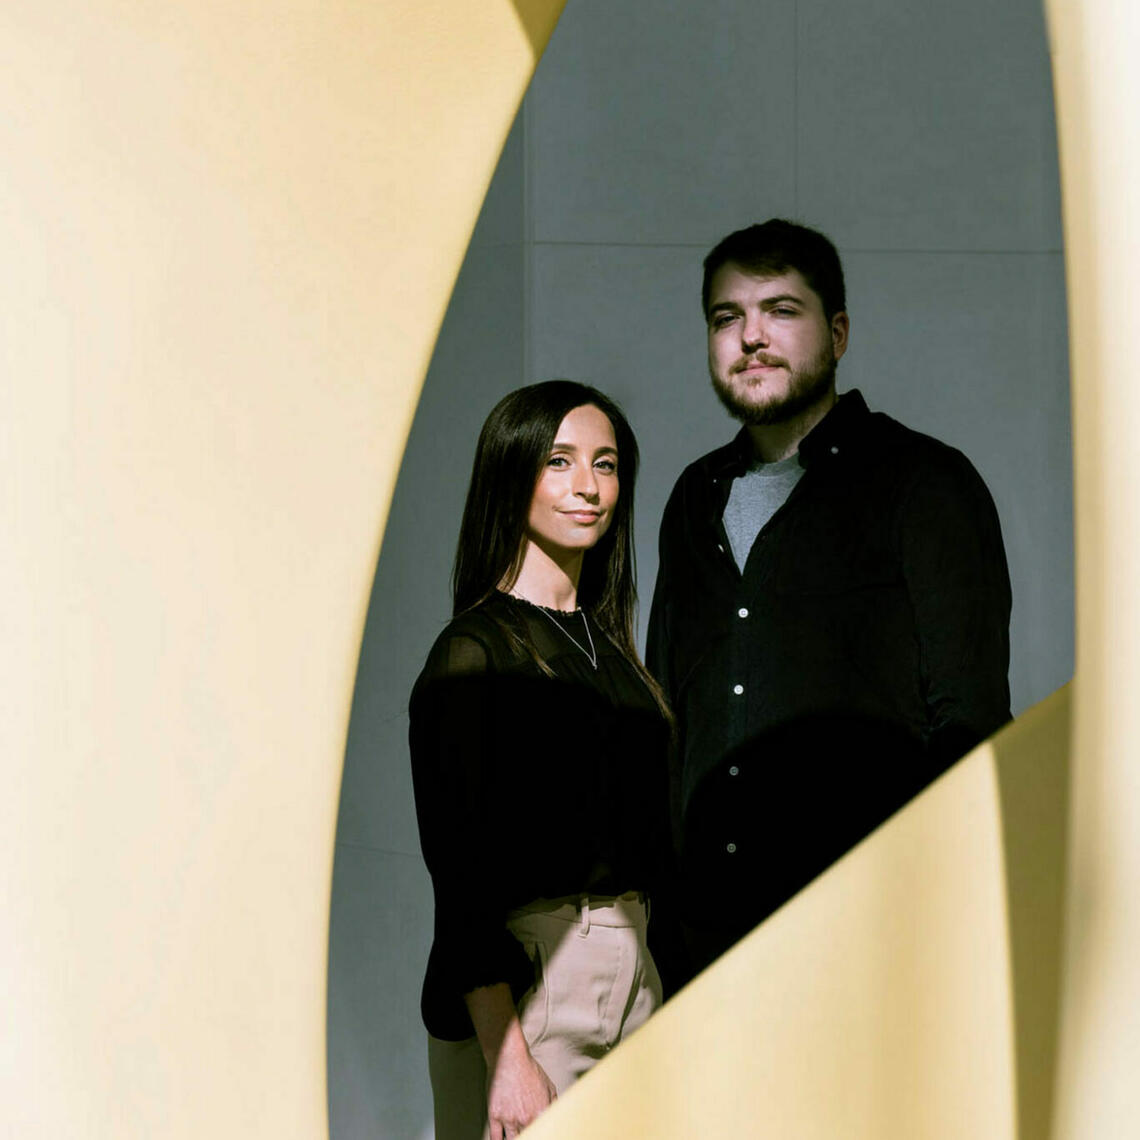 Eli Kinney-Lang and Dion Kelly, Avenue Magazine, Calgary Top 40 Under 40